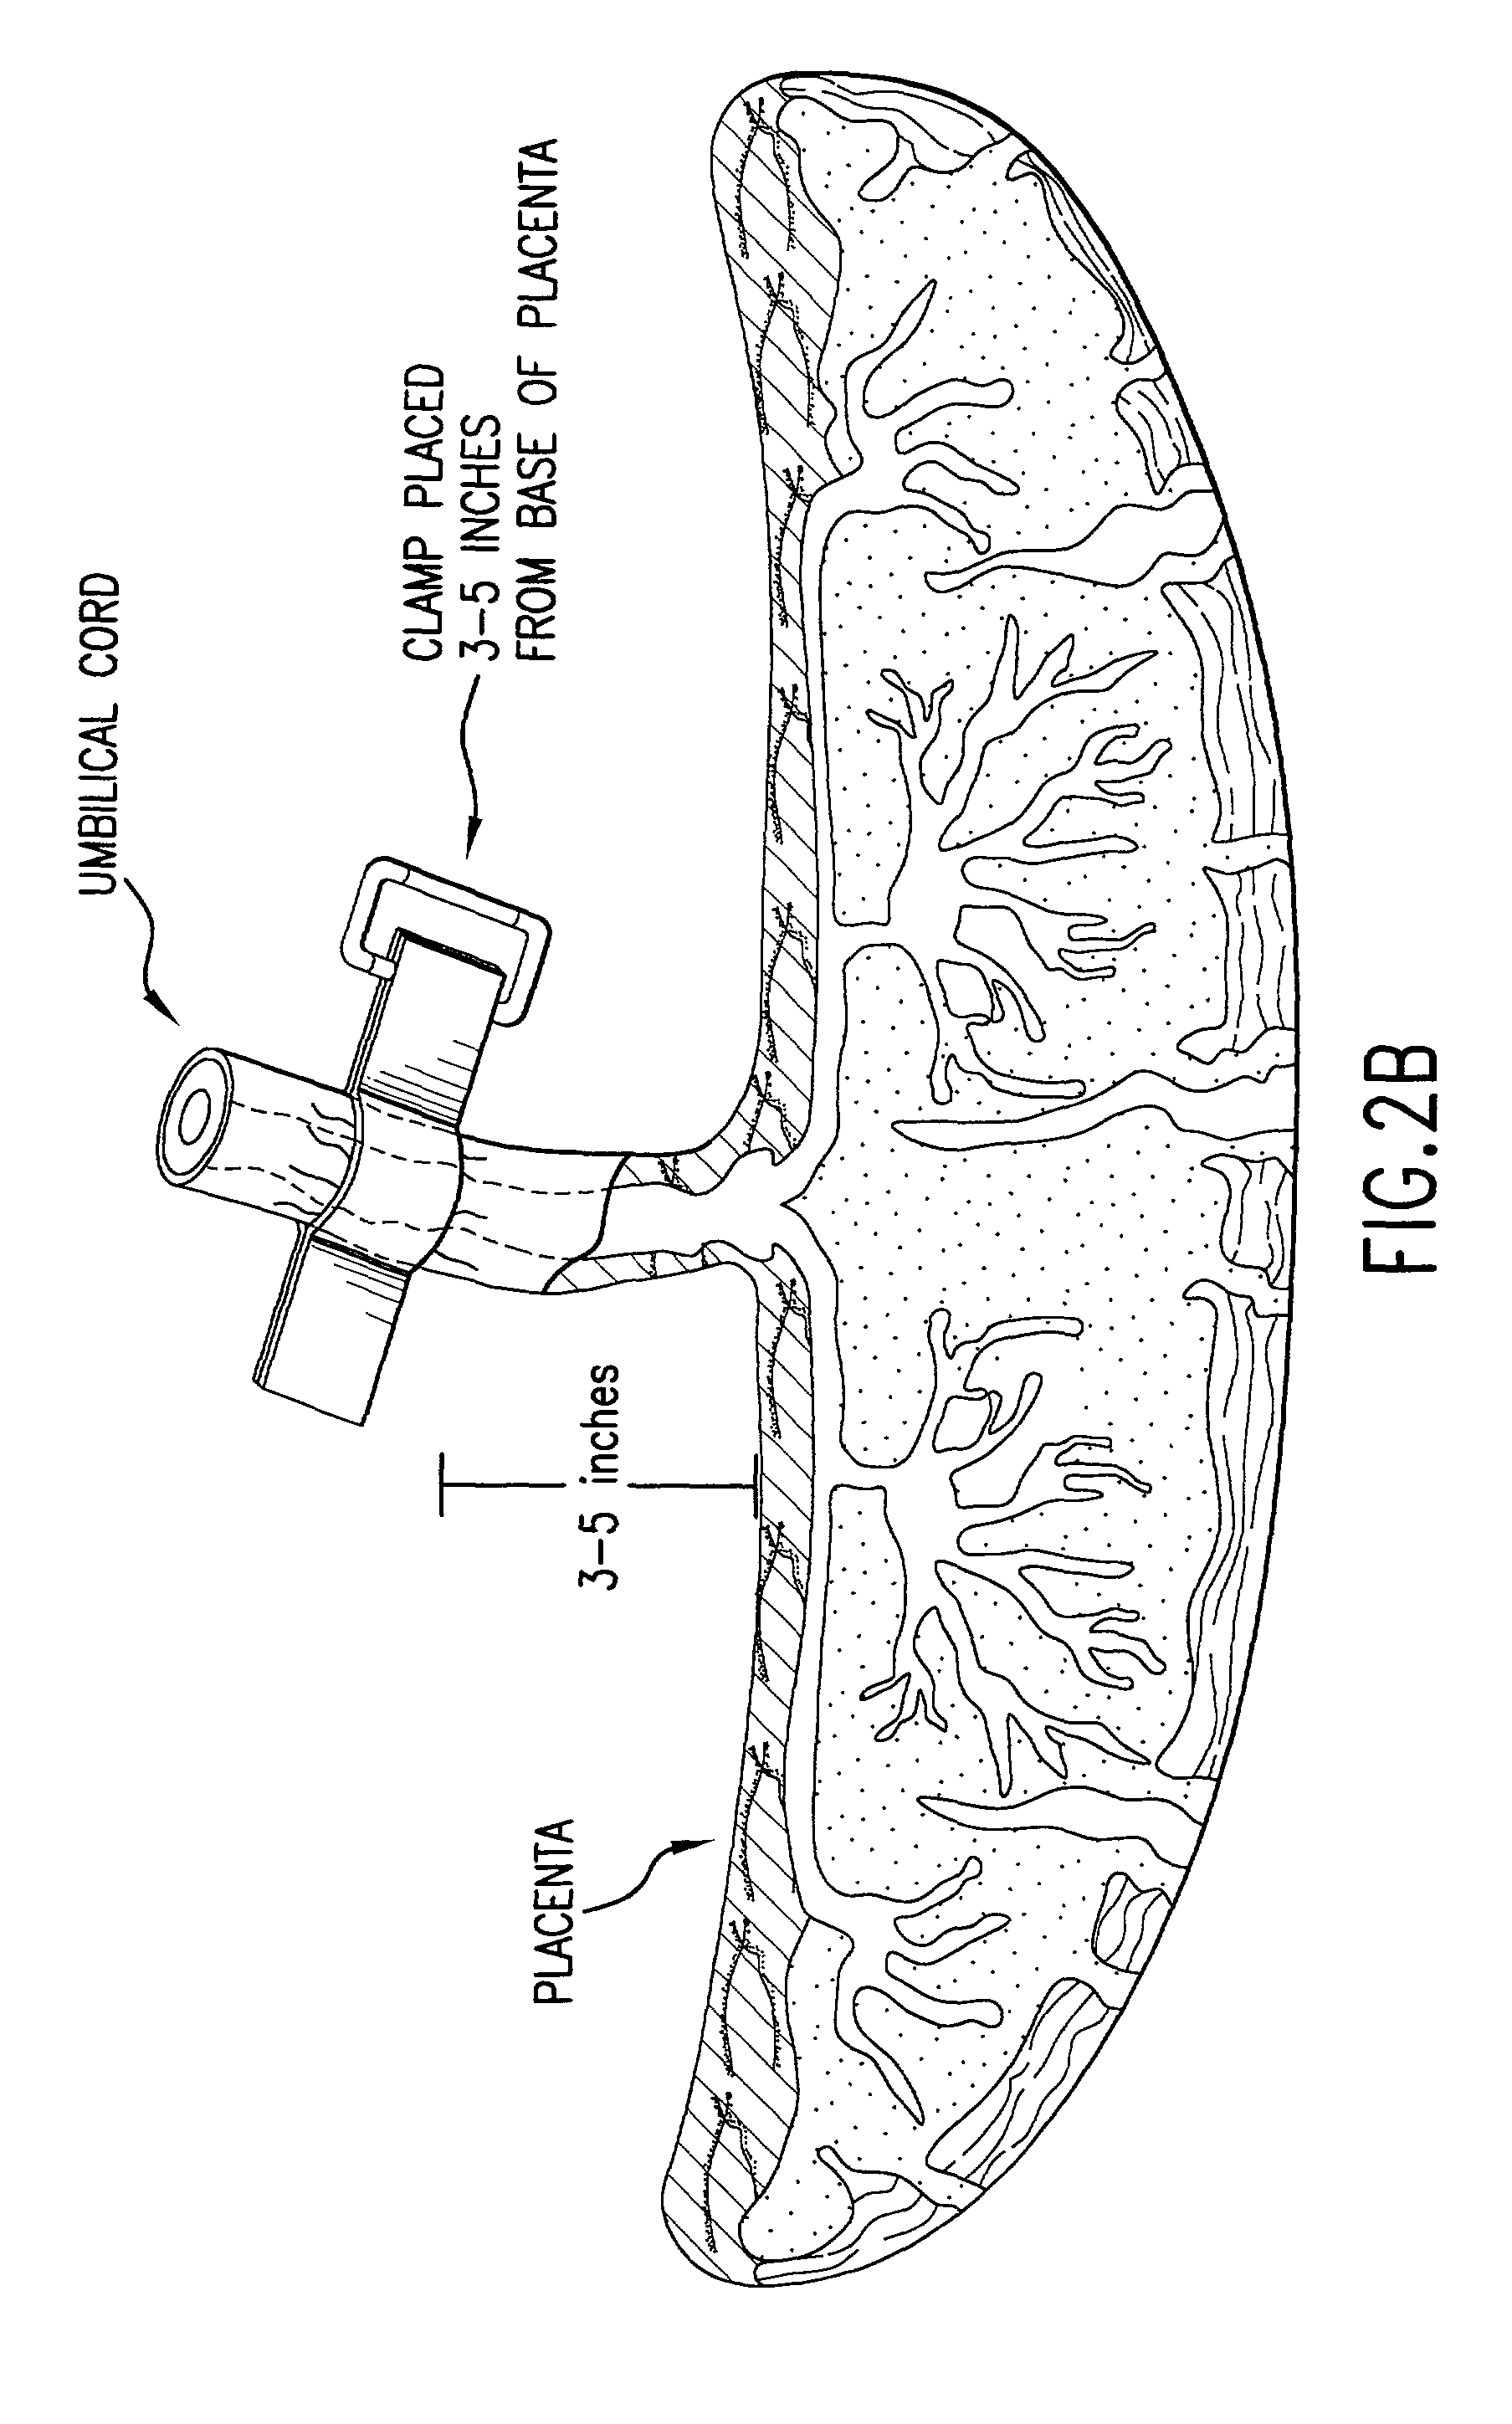 Post-partum mammalian placenta, its use and placental stem cells therefrom